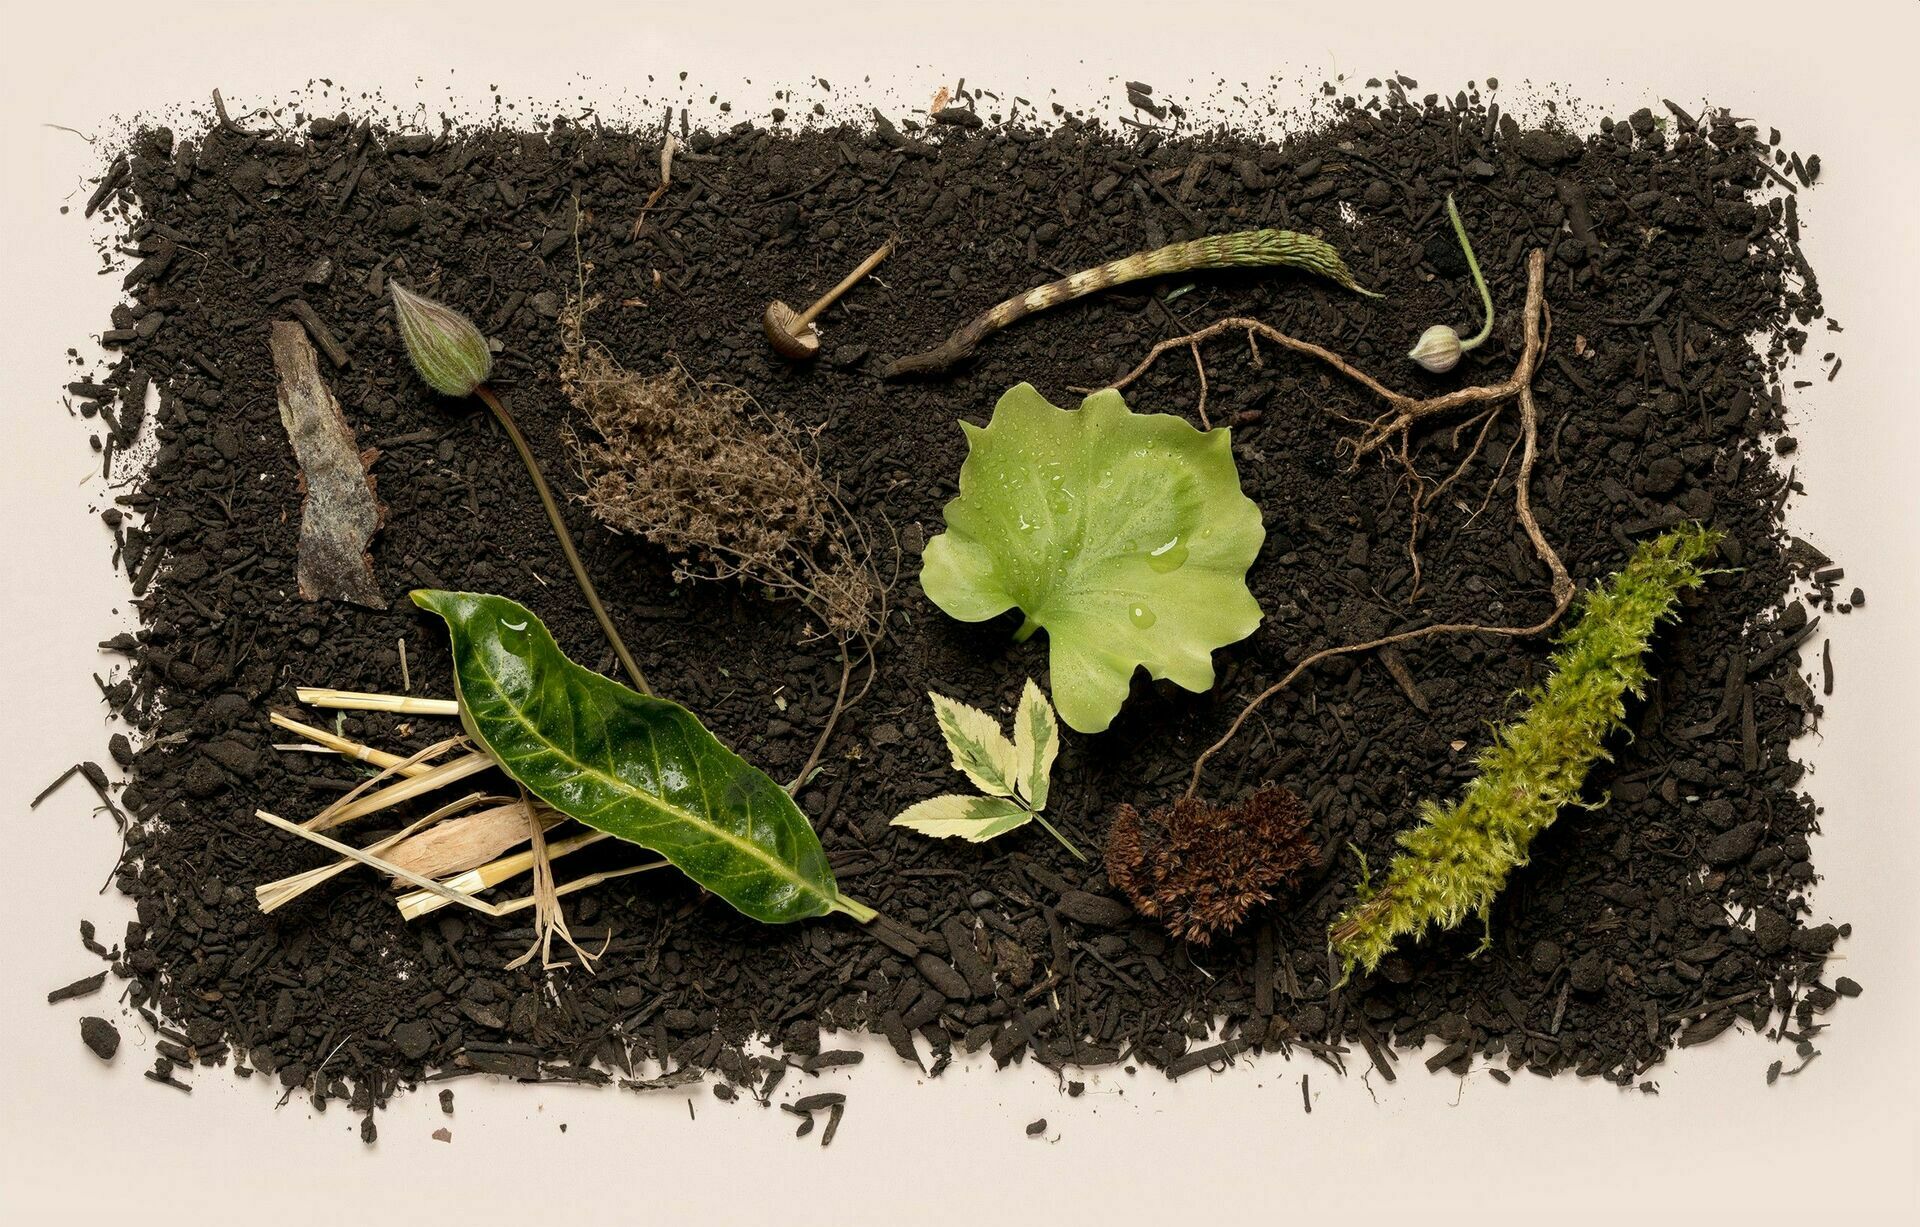 Ashes to ashes: second US state legalizes composting of human remains